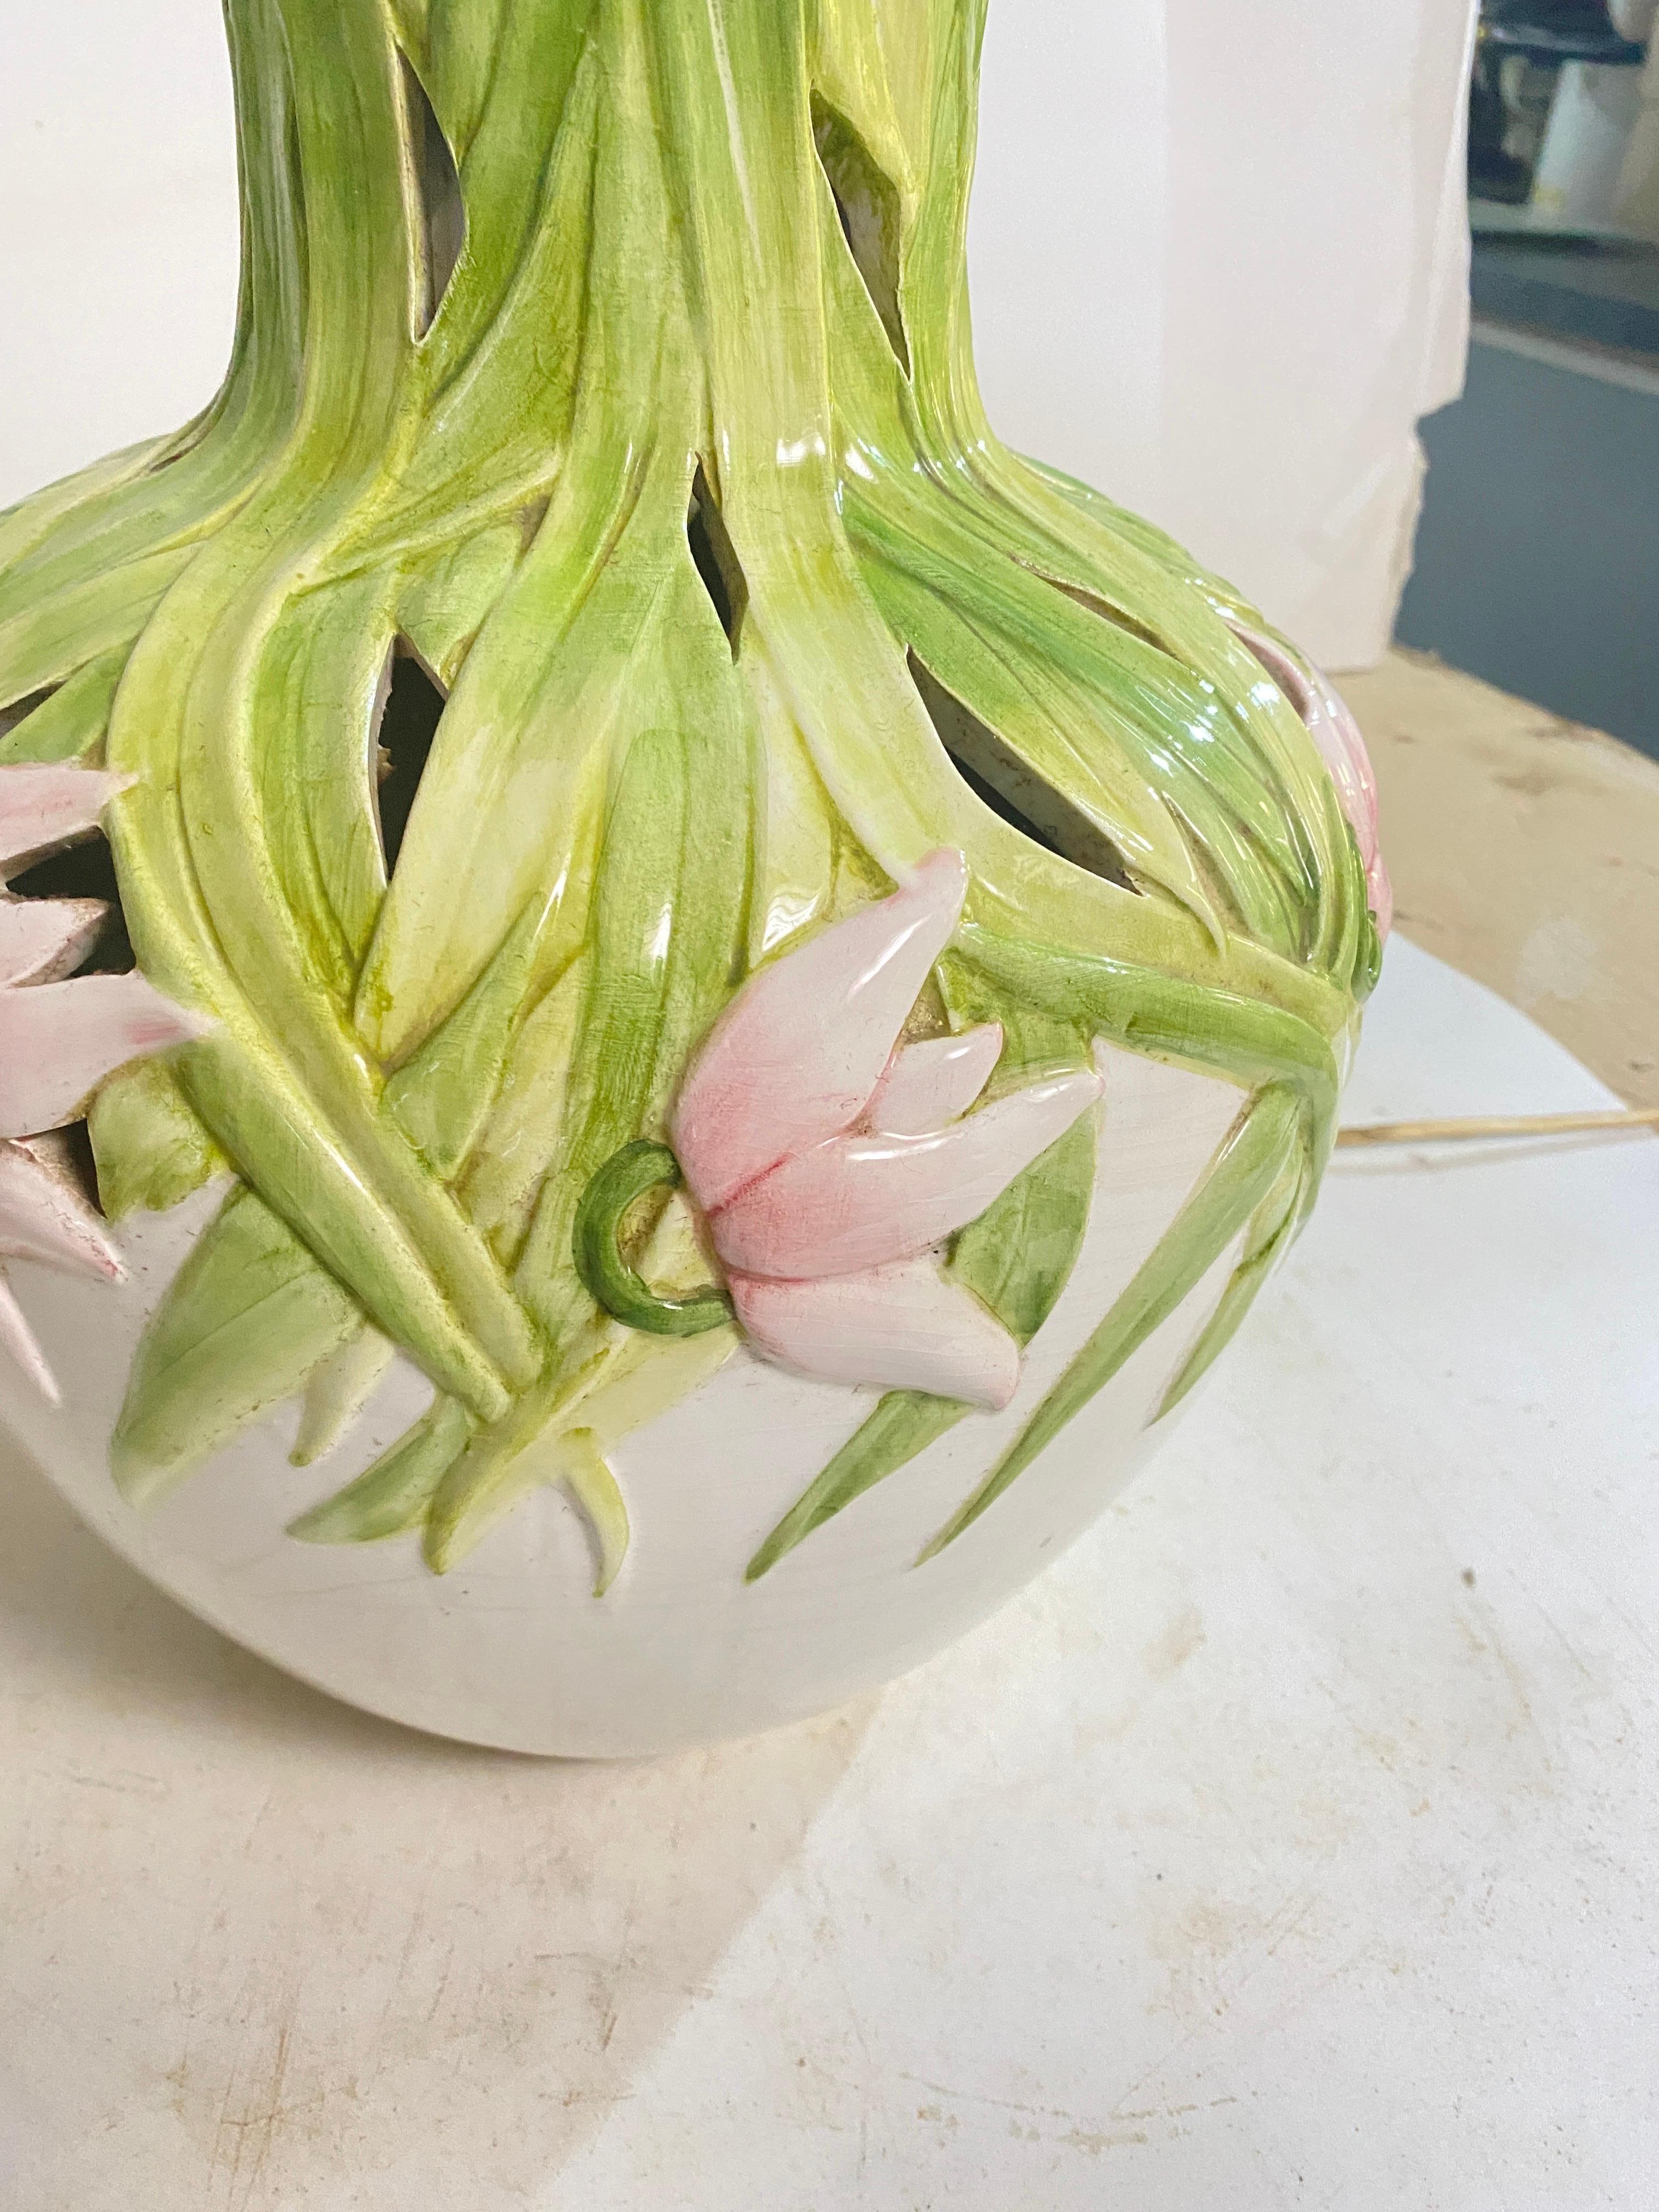 Table Lamp in Crakled Enemeled Ceramic Green Pink and White colors, France, 1970 For Sale 5